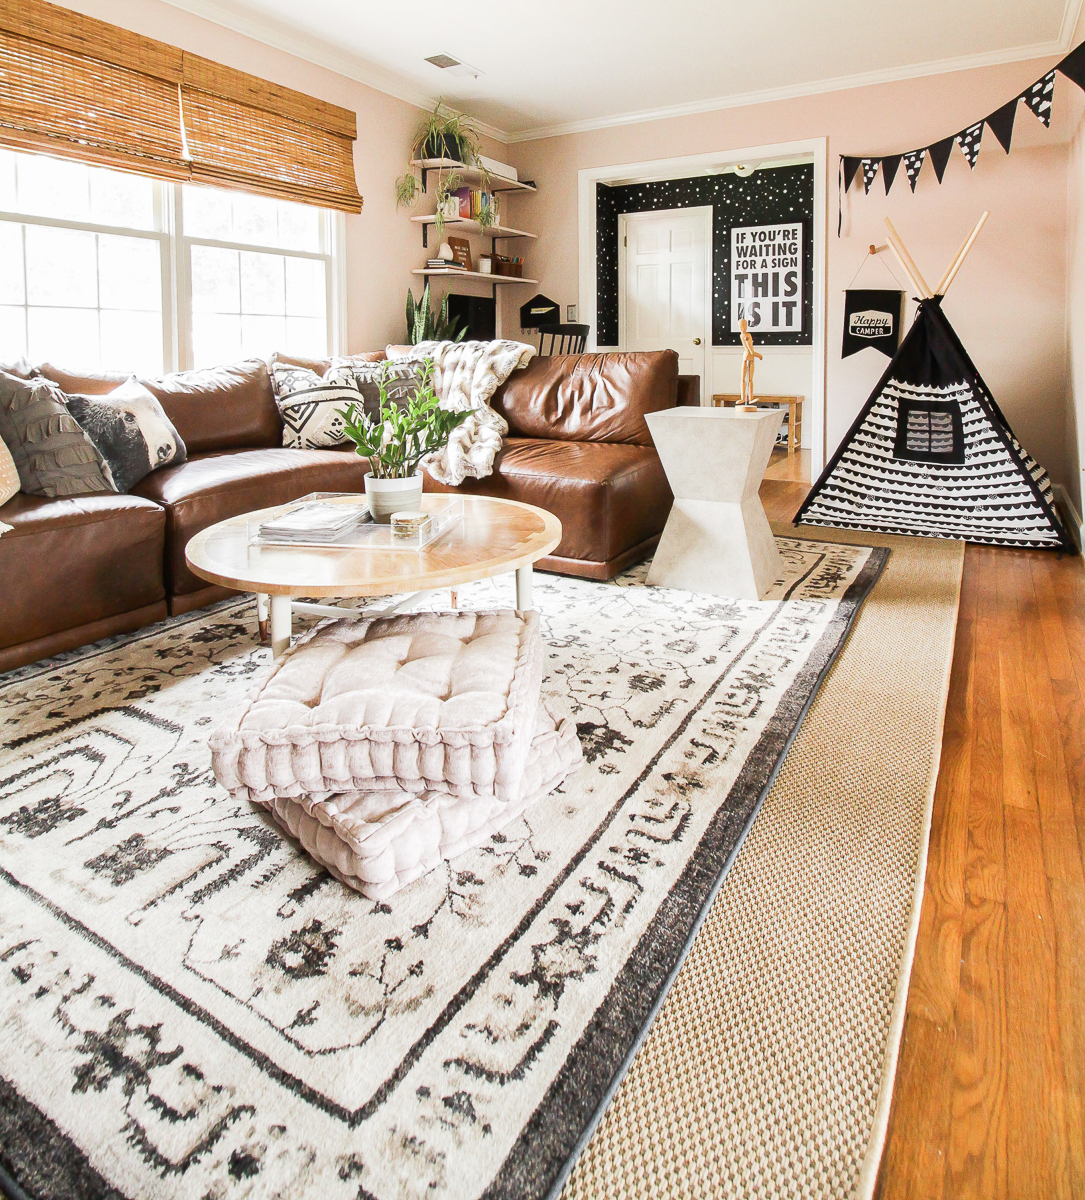 Cozy family room with leather sectional sofa and layered rugs